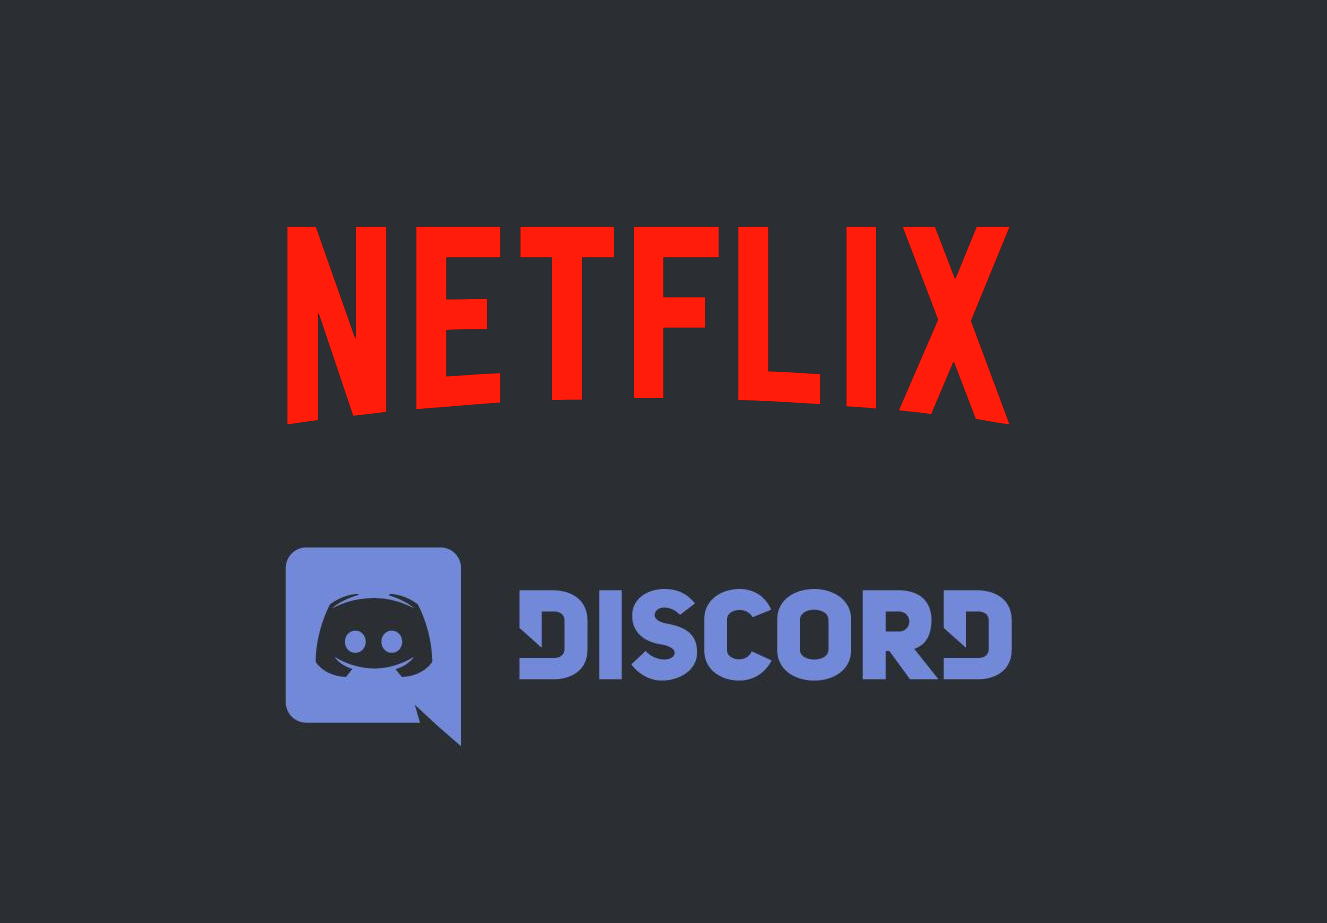 How to Stream Netflix on Discord with Friends to Watch TV Shows and Movies